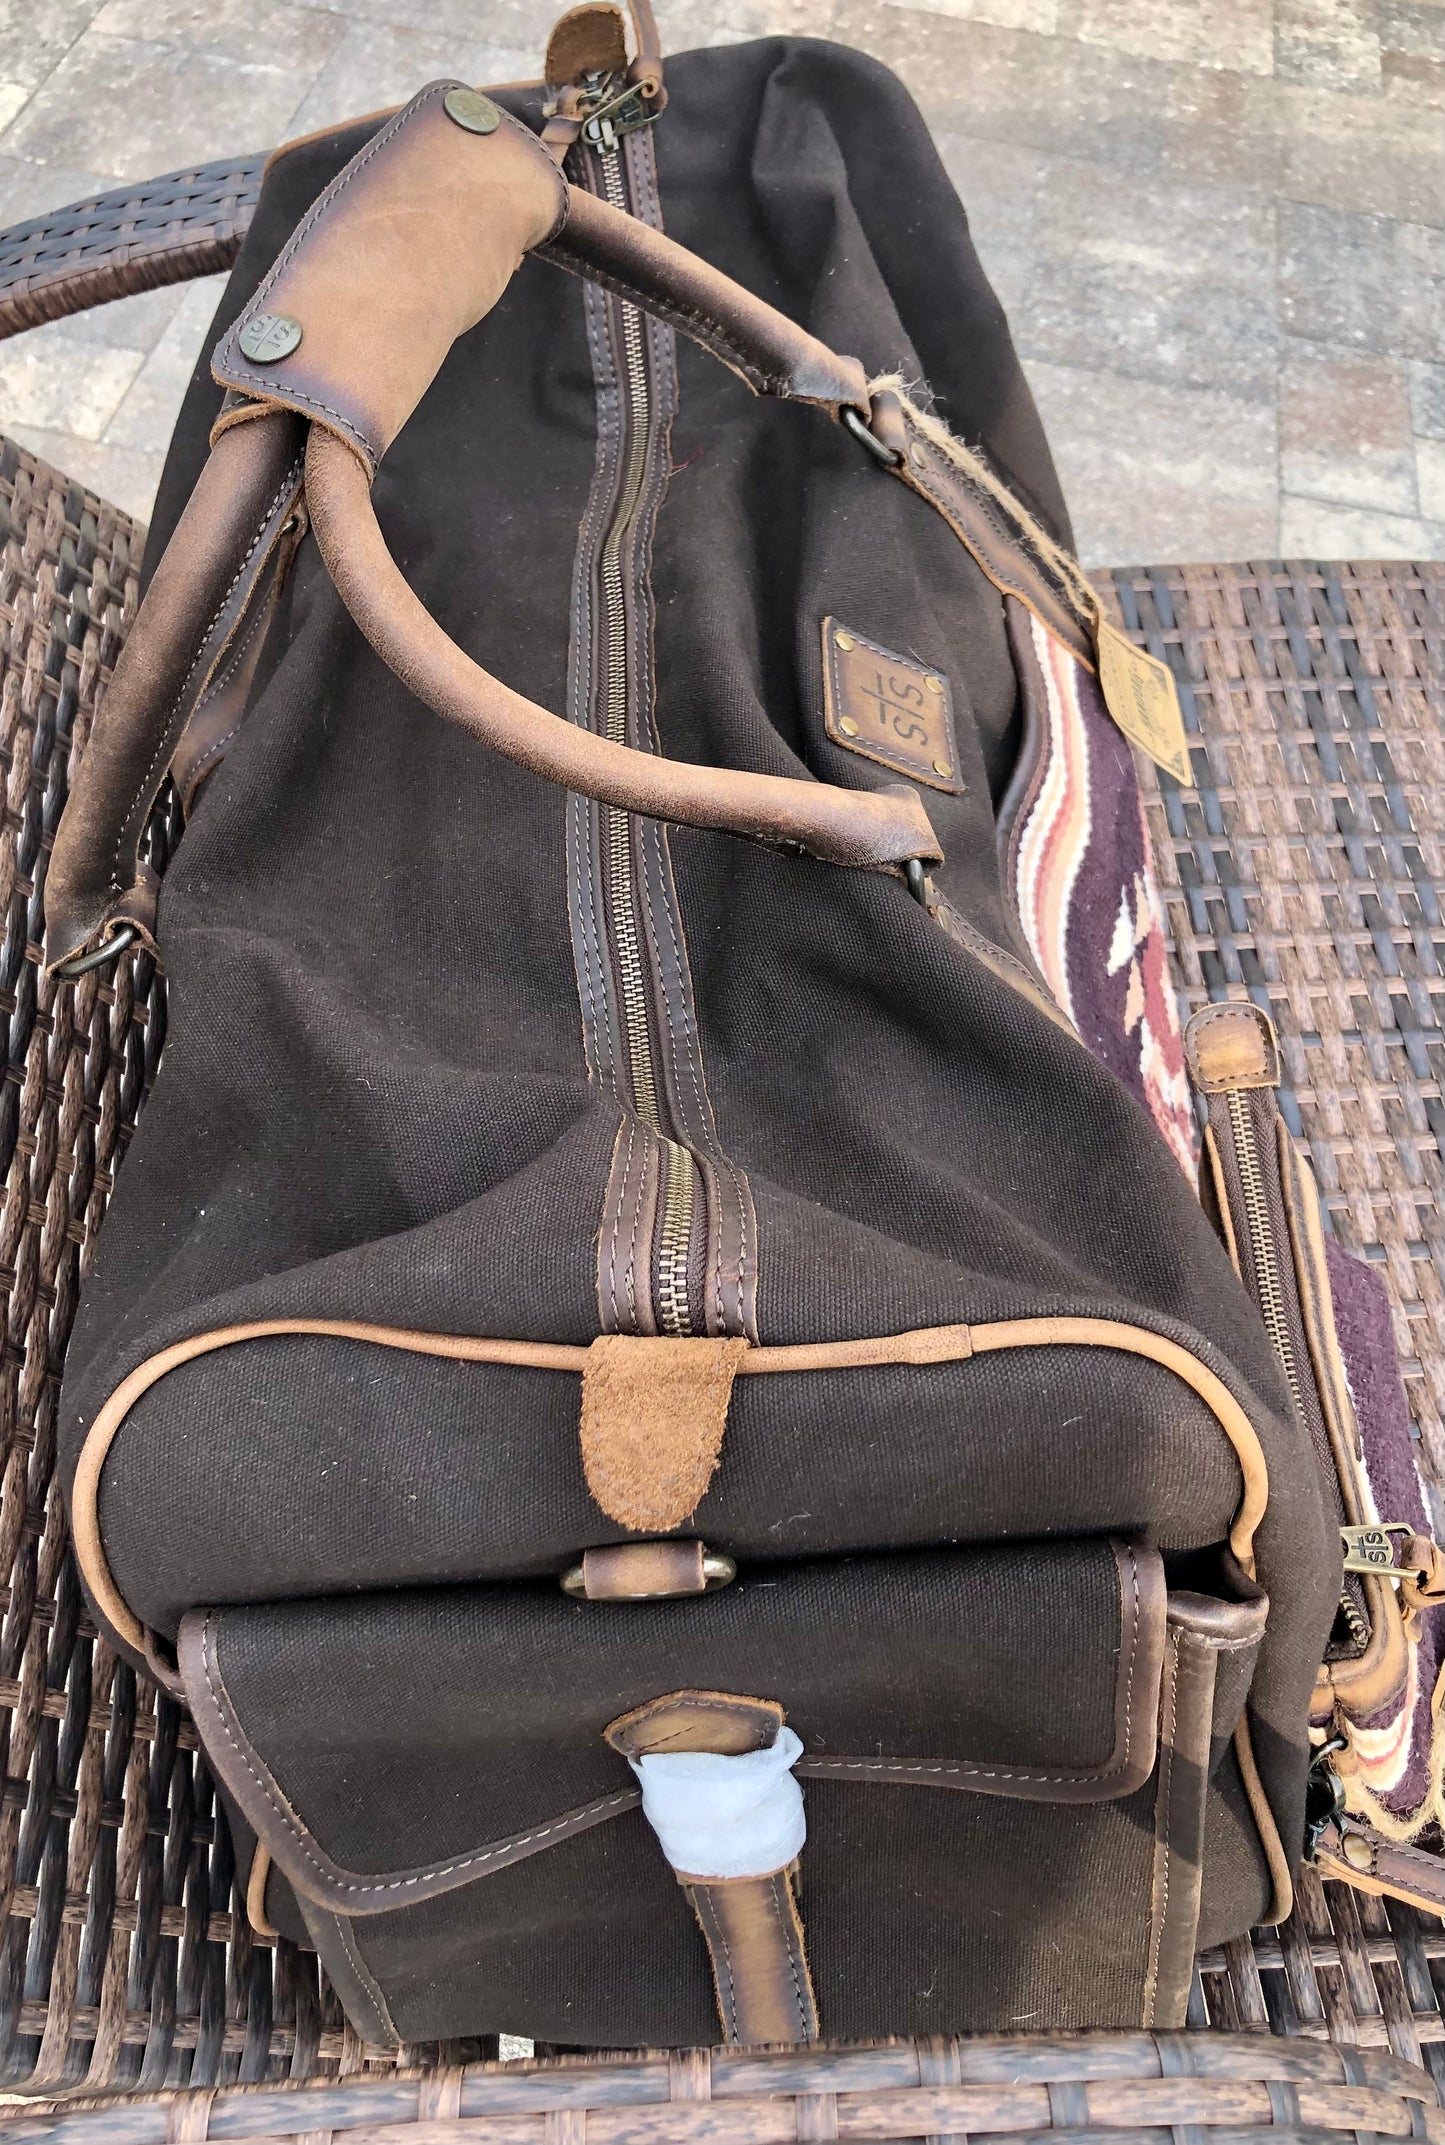 STS Sioux Falls Duffle Bag